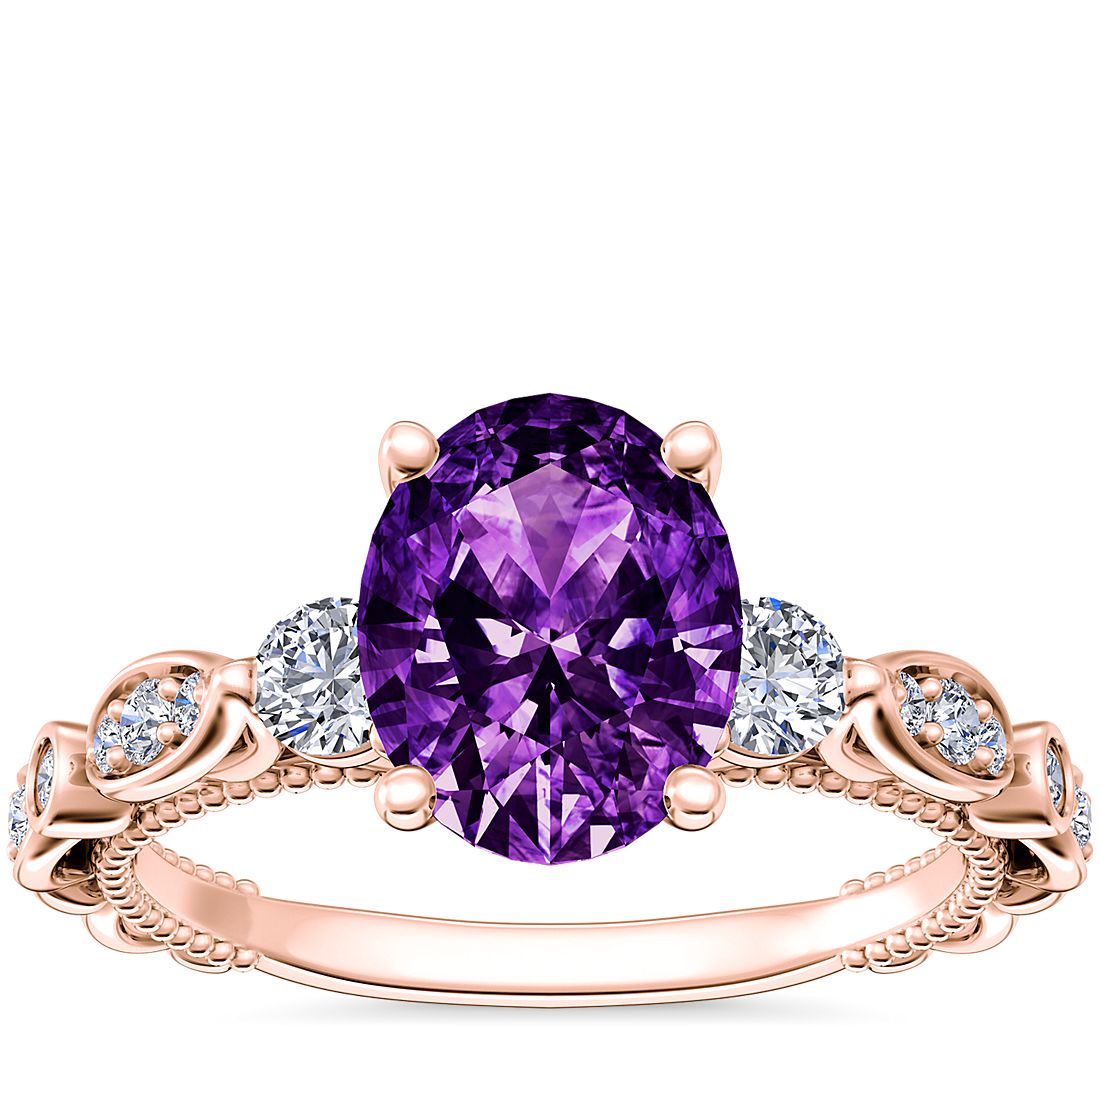 Floral Ellipse Diamond Cathedral Engagement Ring with Oval Amethyst in 14k Rose Gold (9x7mm)